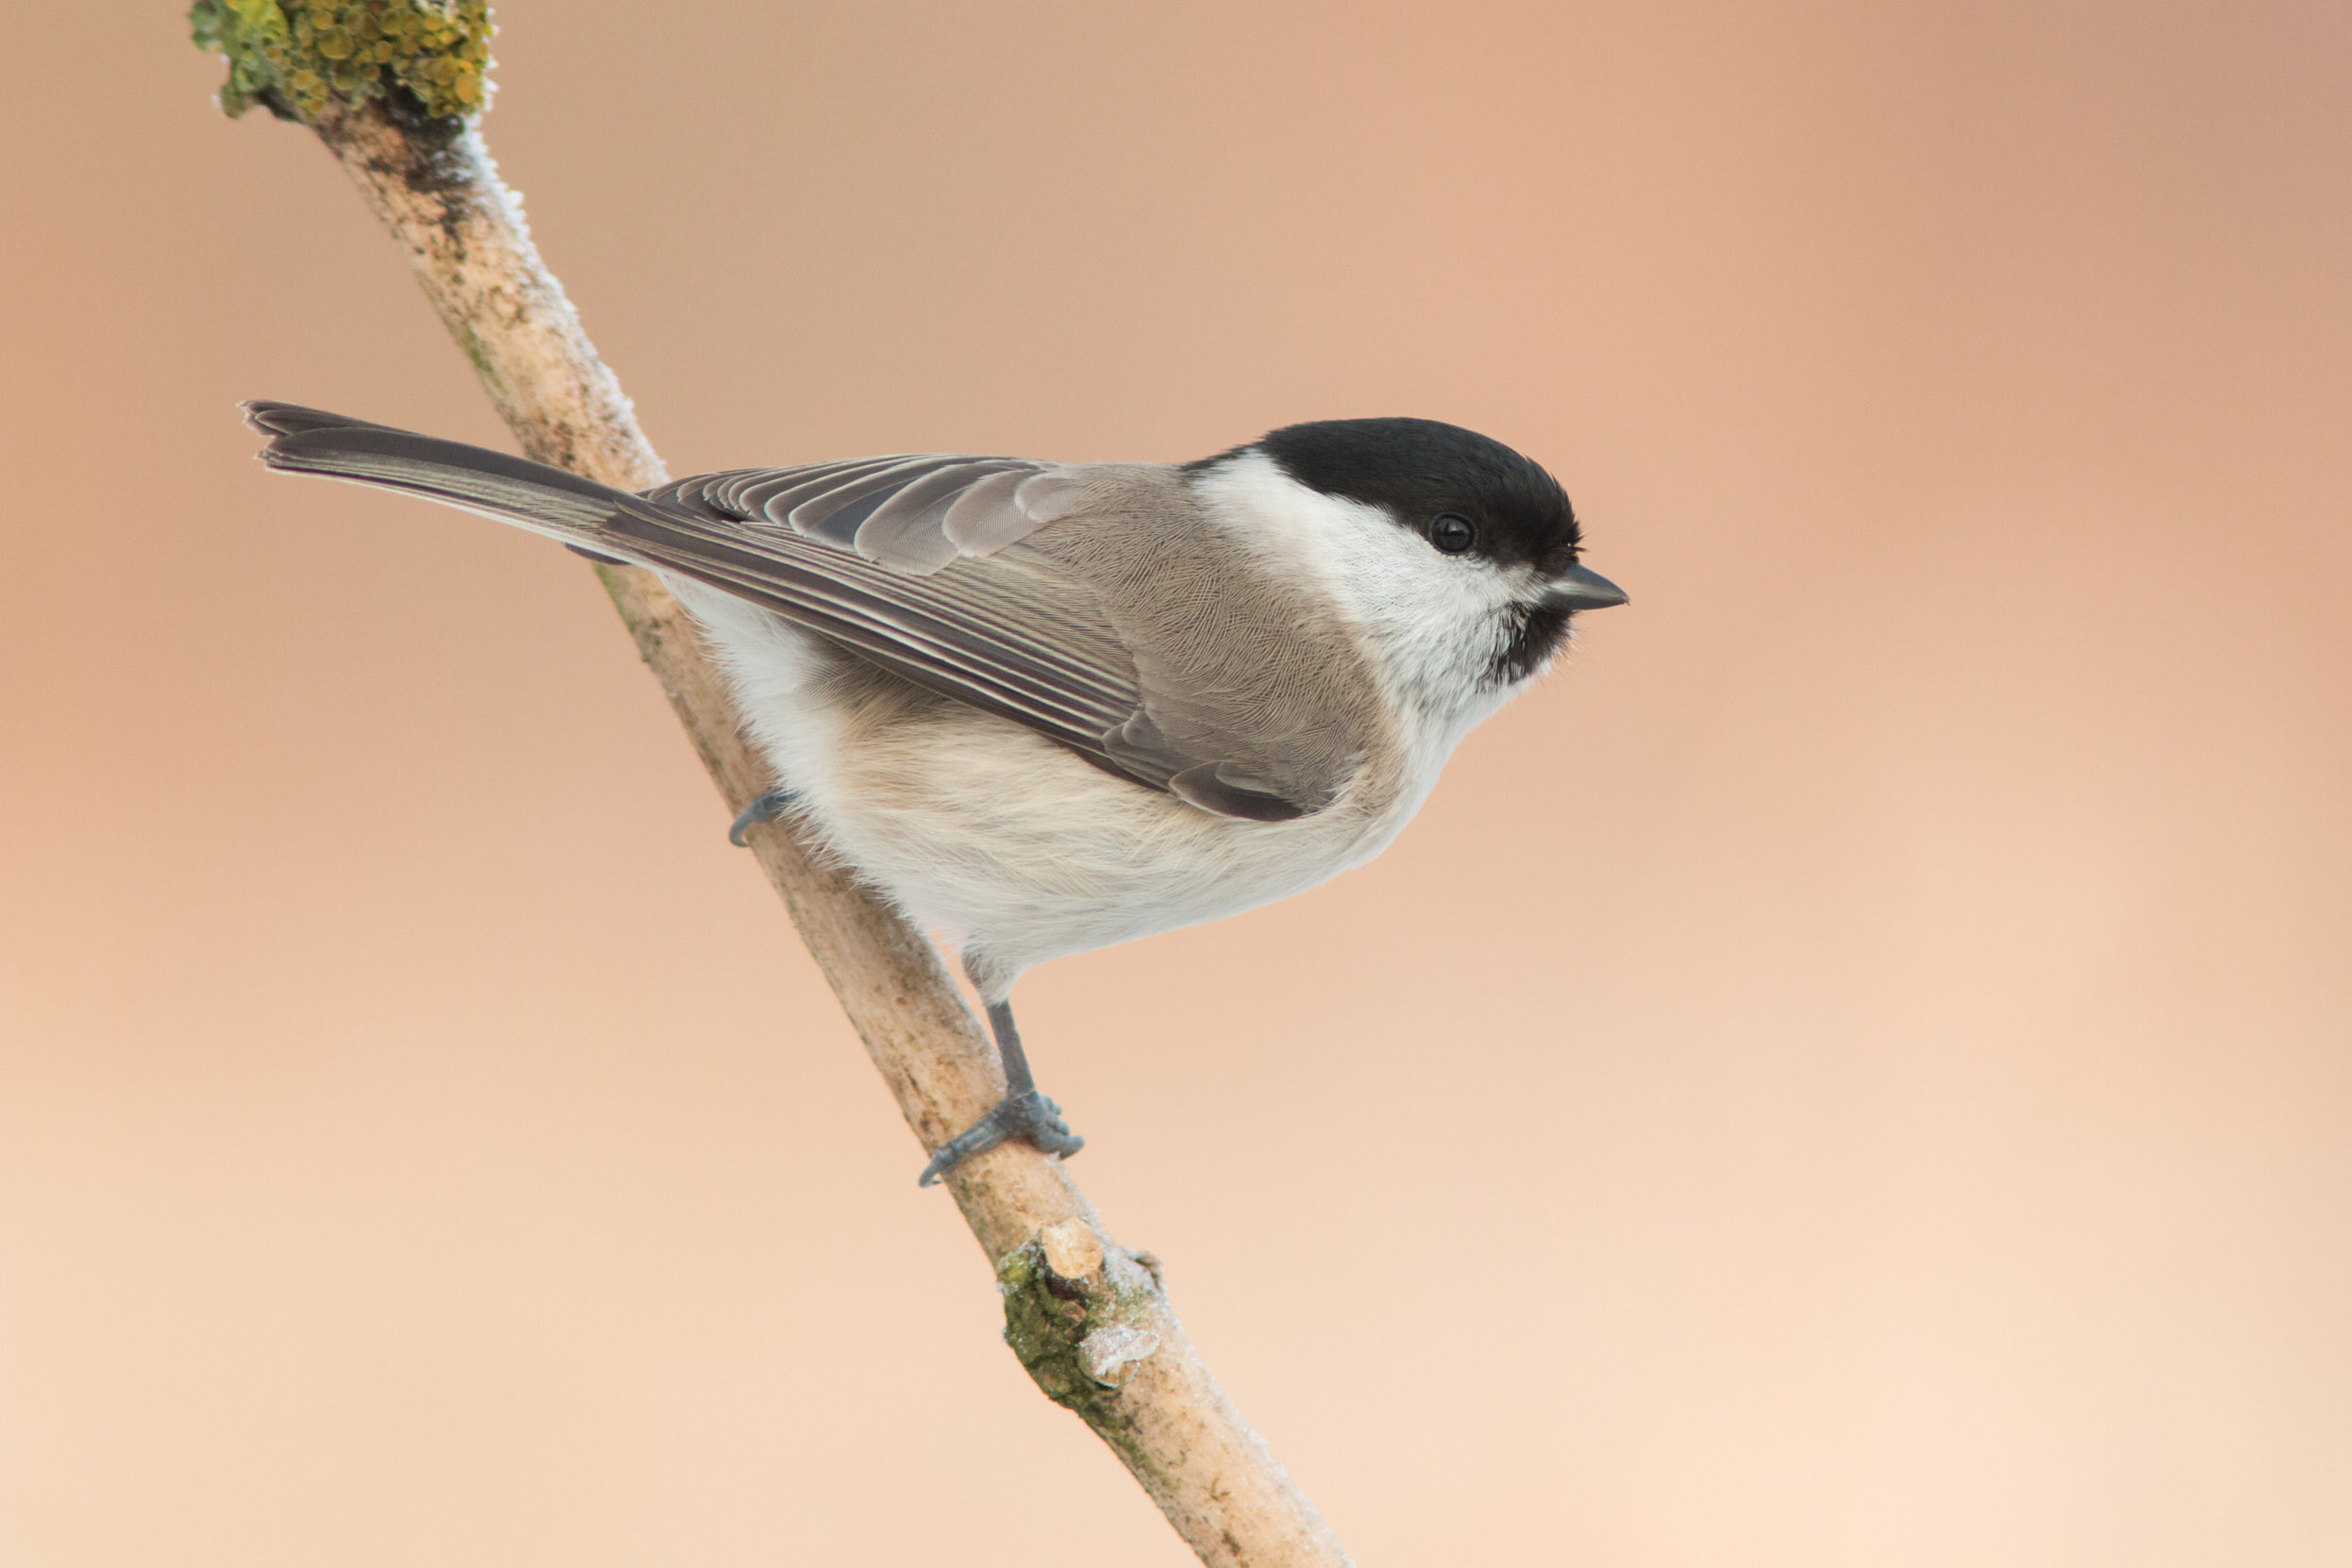 A lone Marsh Tit perched on a branch against a pale orange, peach background.